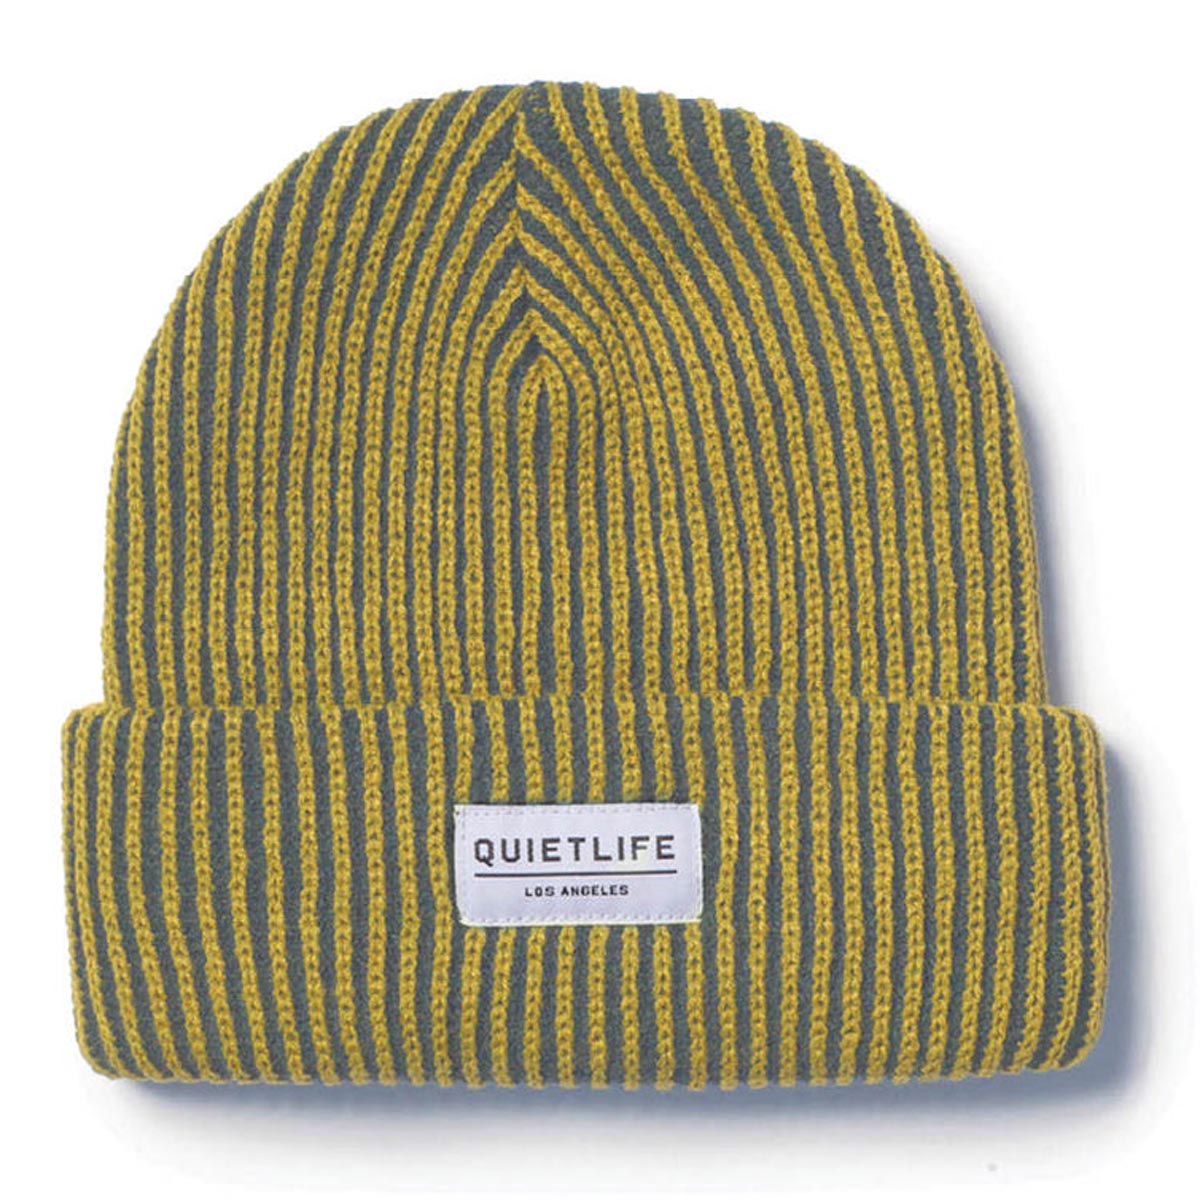 The Quiet Life Vertical Beanie - Yellow/Grey image 1